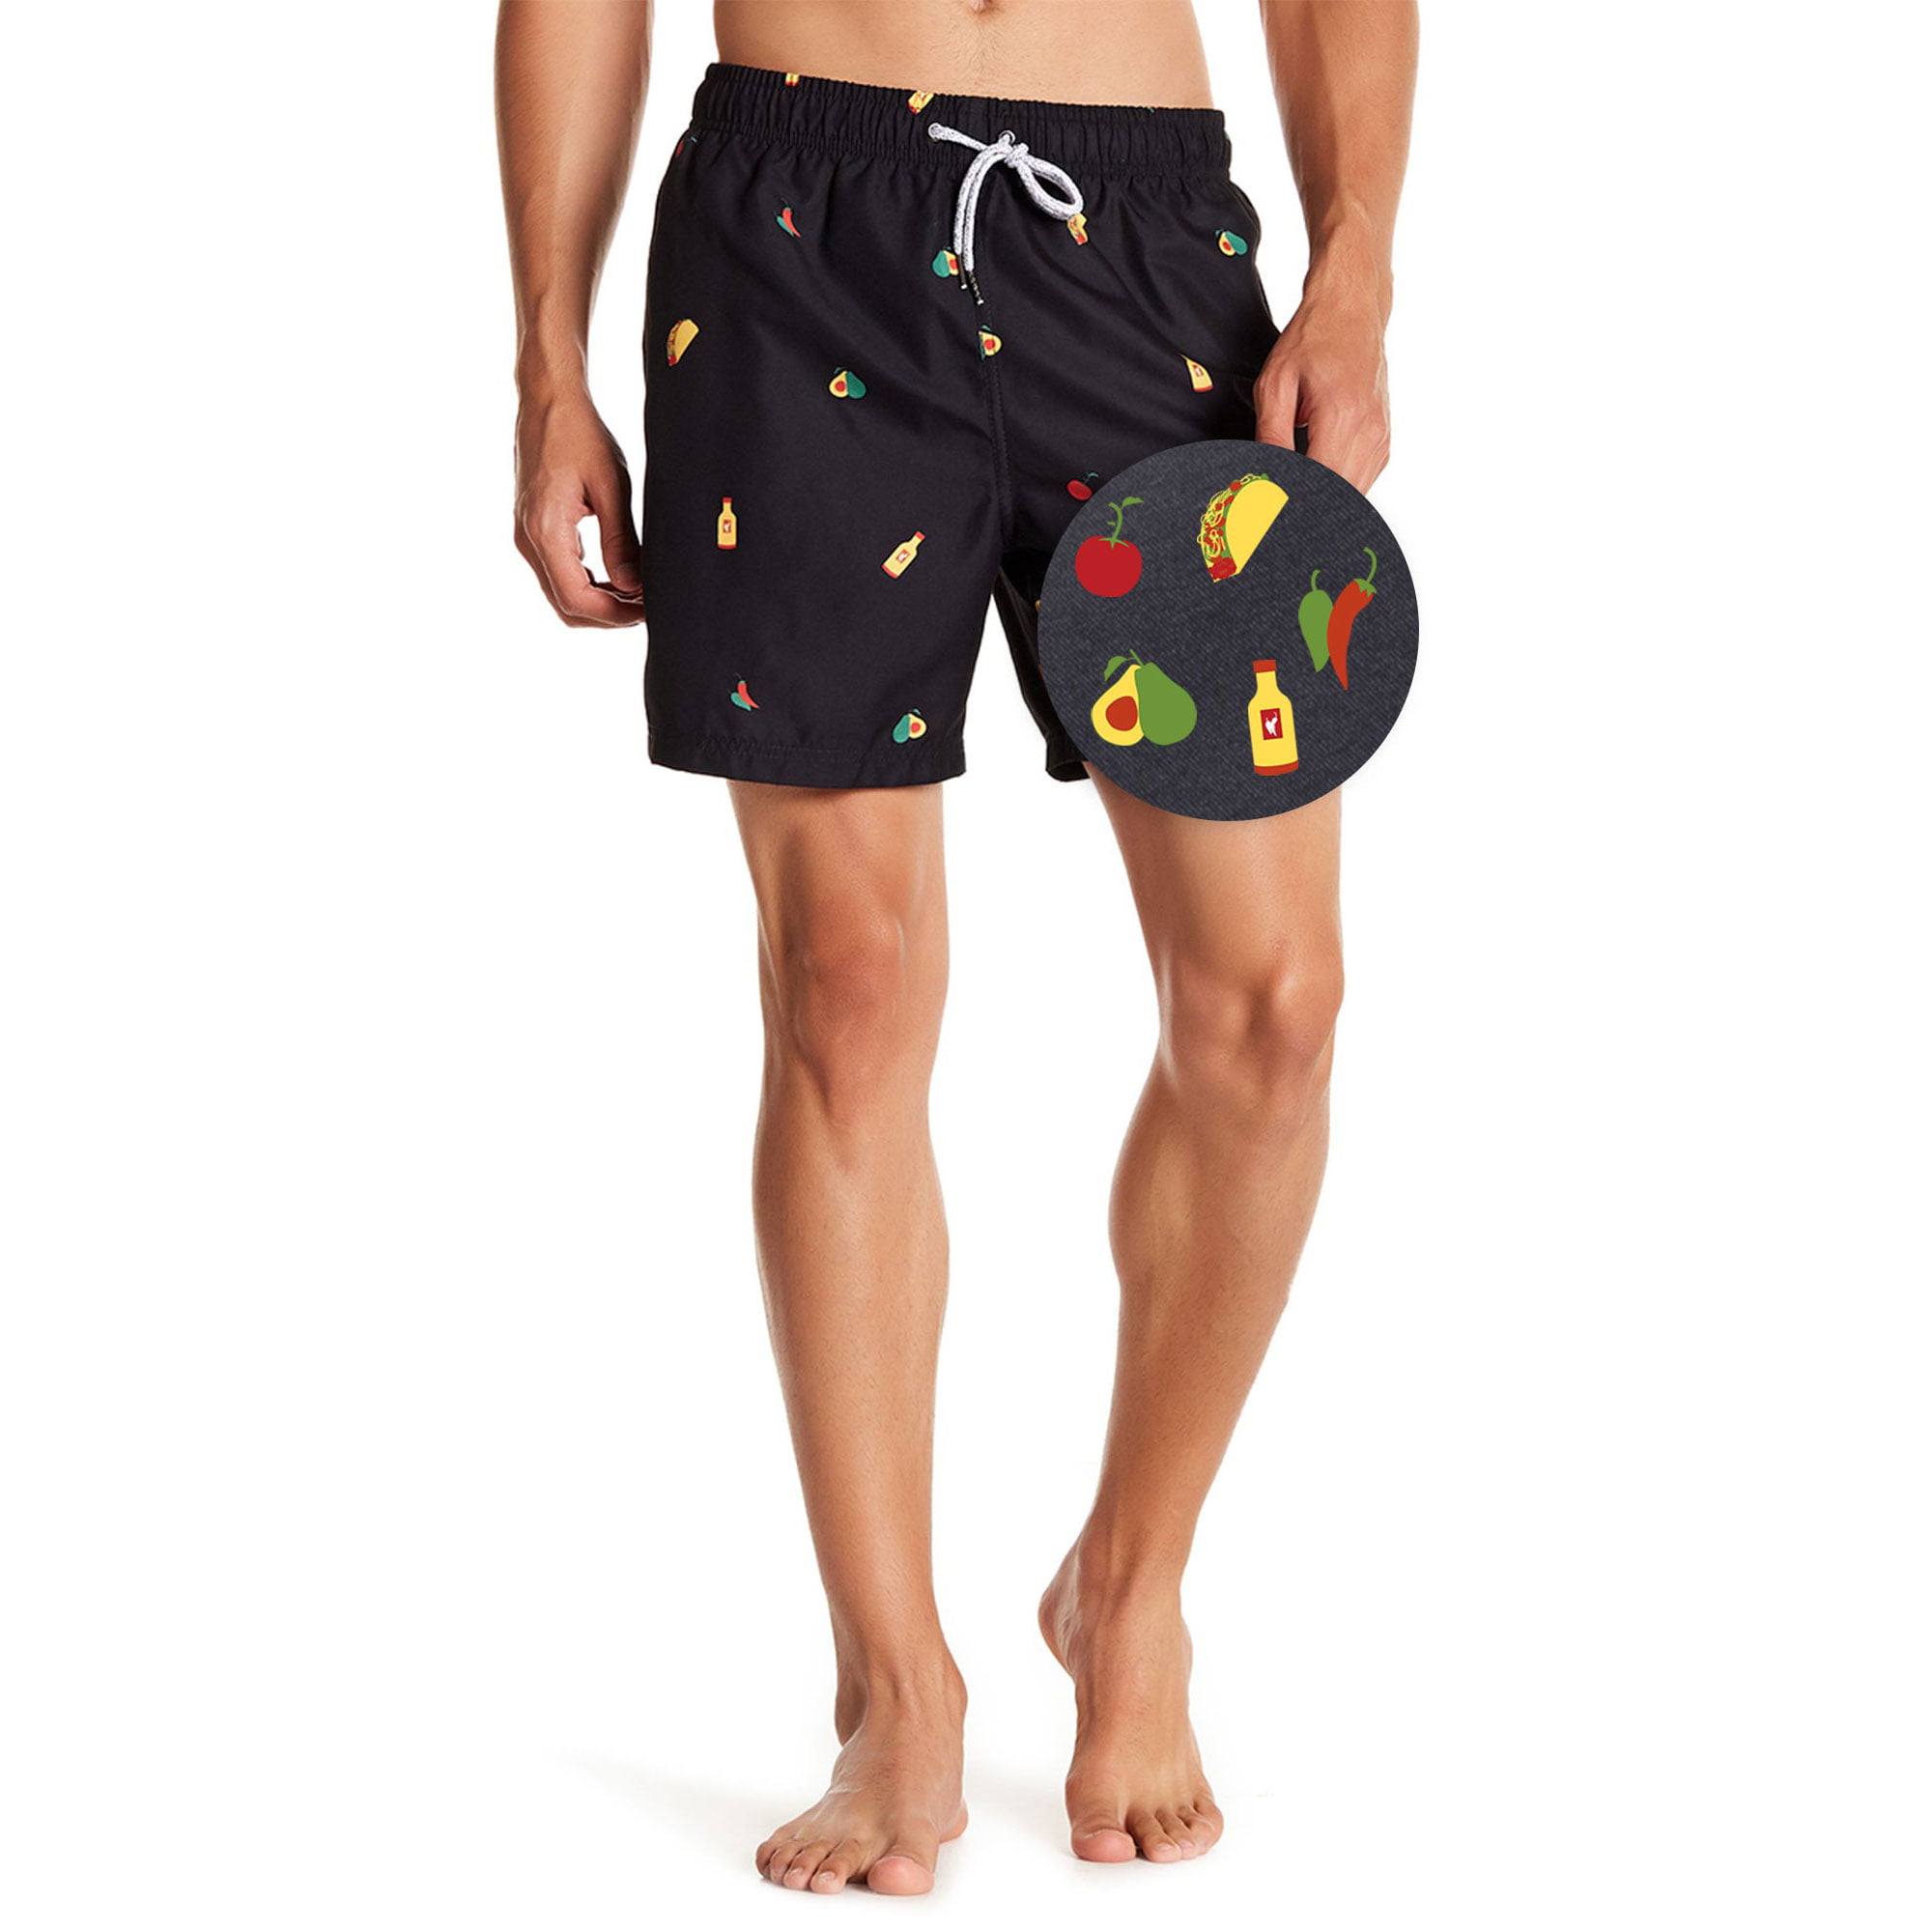 Mens Swim Trunks Cute Crabs Printed Beach Board Shorts with Pockets Cool Novelty Bathing Suits for Teen Boys